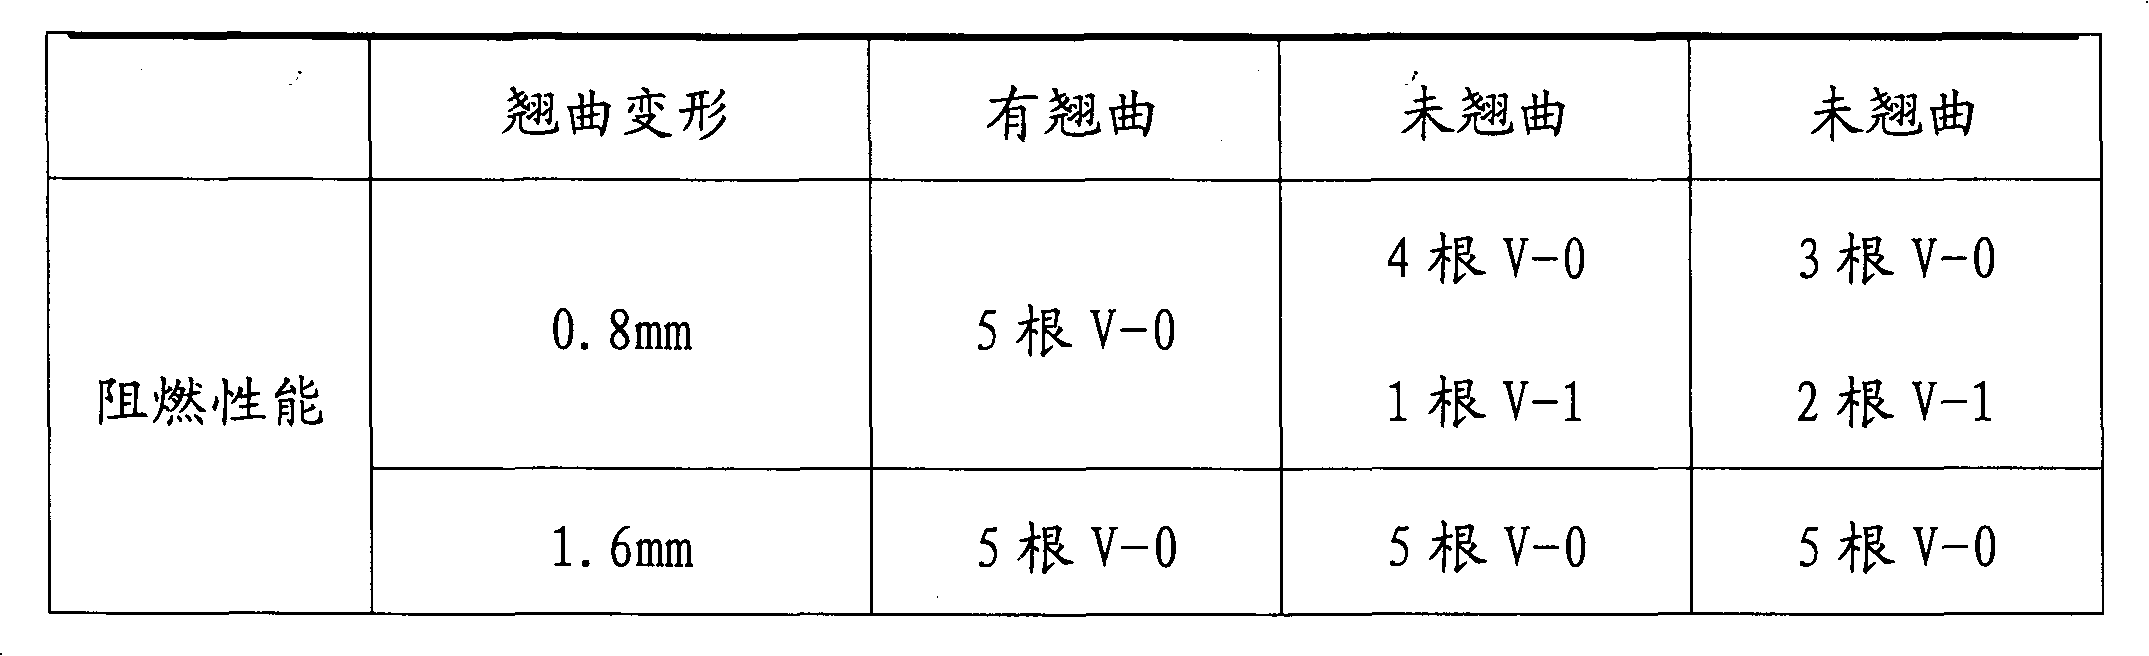 Environment-friendly flame retardant PBT/PC composite material and preparation method thereof